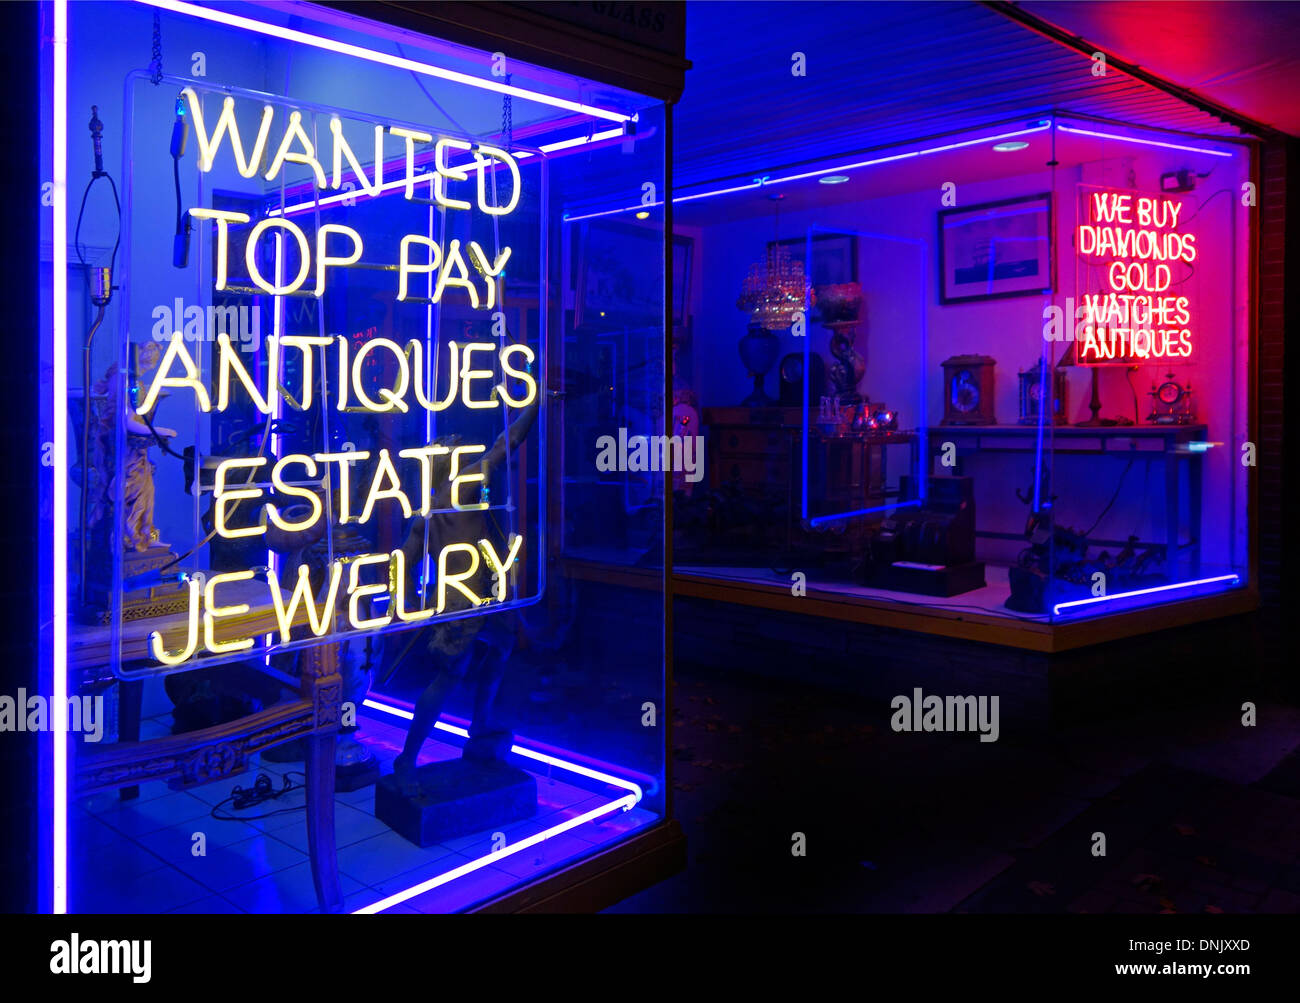 wanted top pay for antique jewelry neon sign Stock Photo